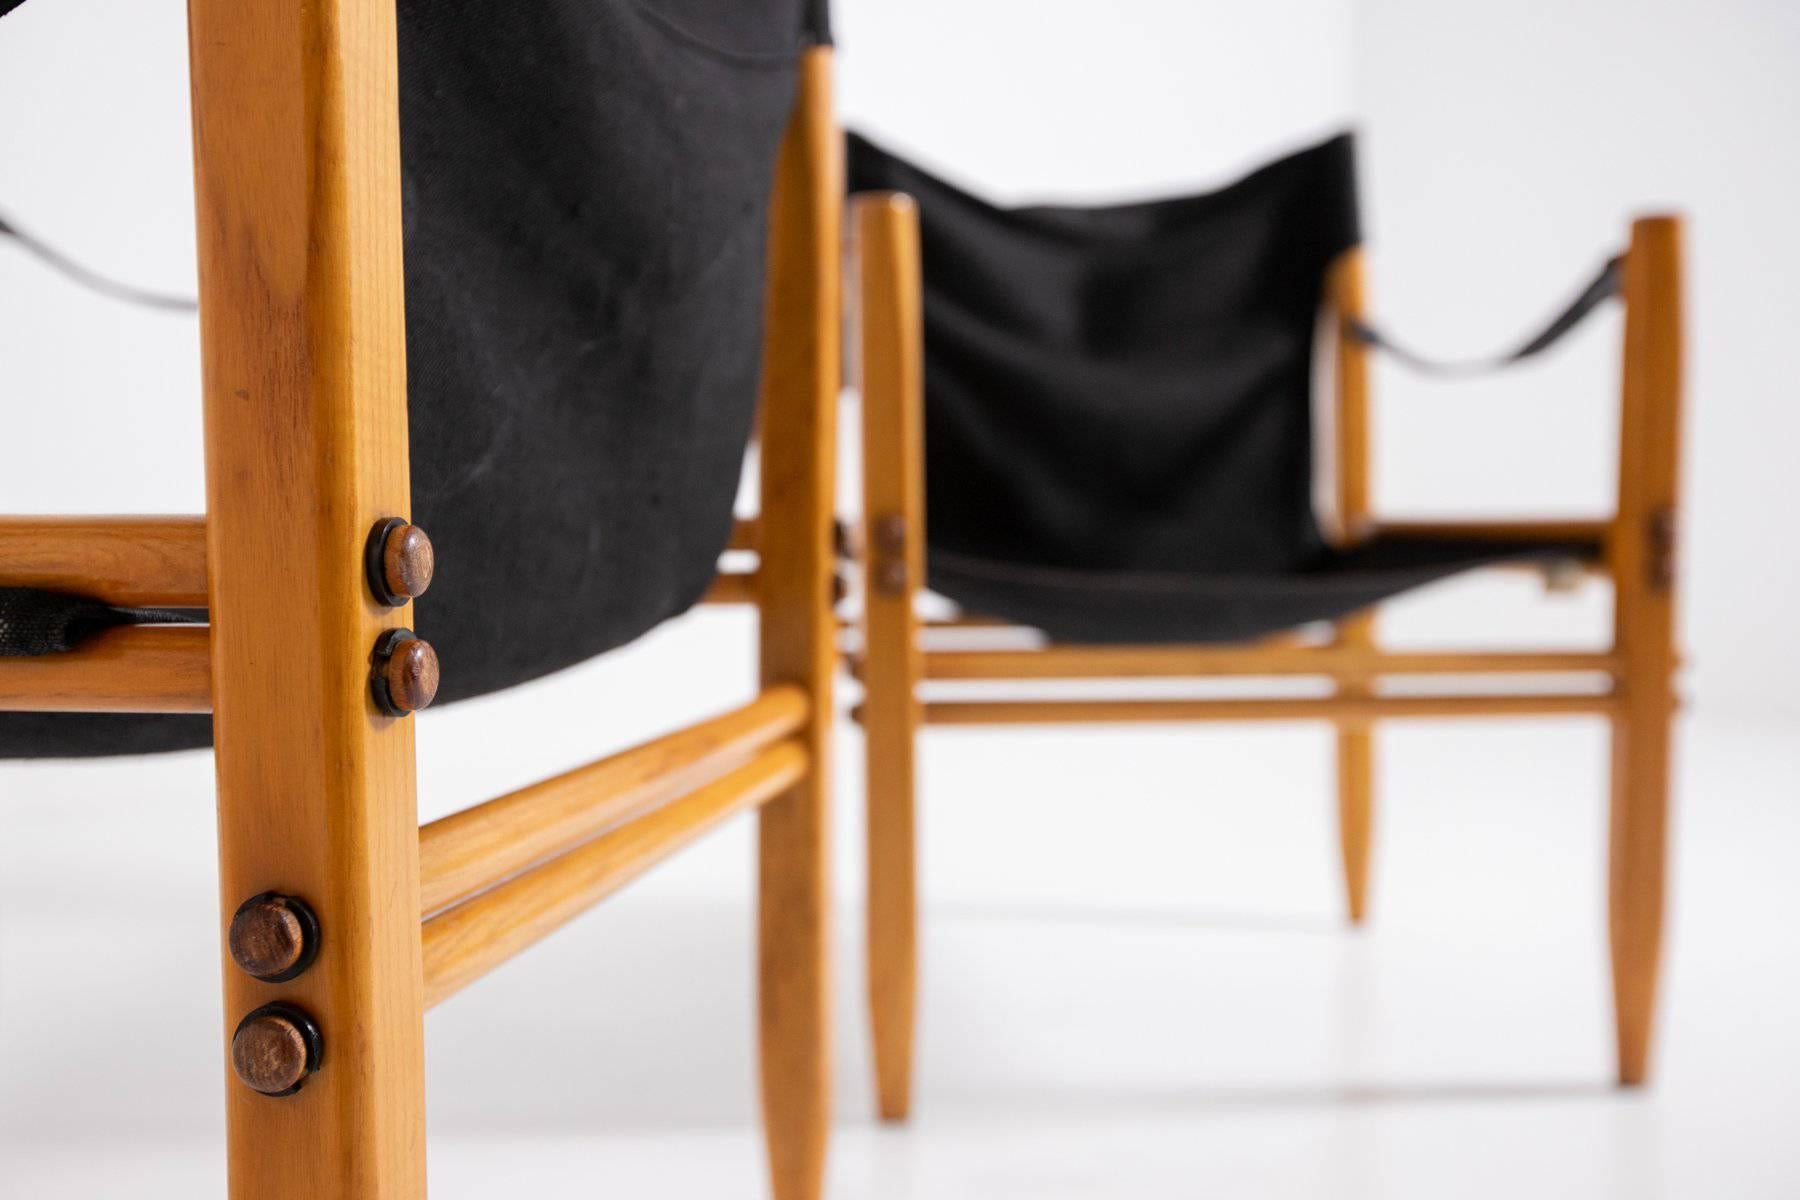 Pair of small armchairs model Oasi 85 designed by Franco Legler, produced by Zanotta, 1960. The small armchairs have a beechwood frame and black canvas covering. The peculiarity of the seat, in addition to its perfect wooden joints, is its